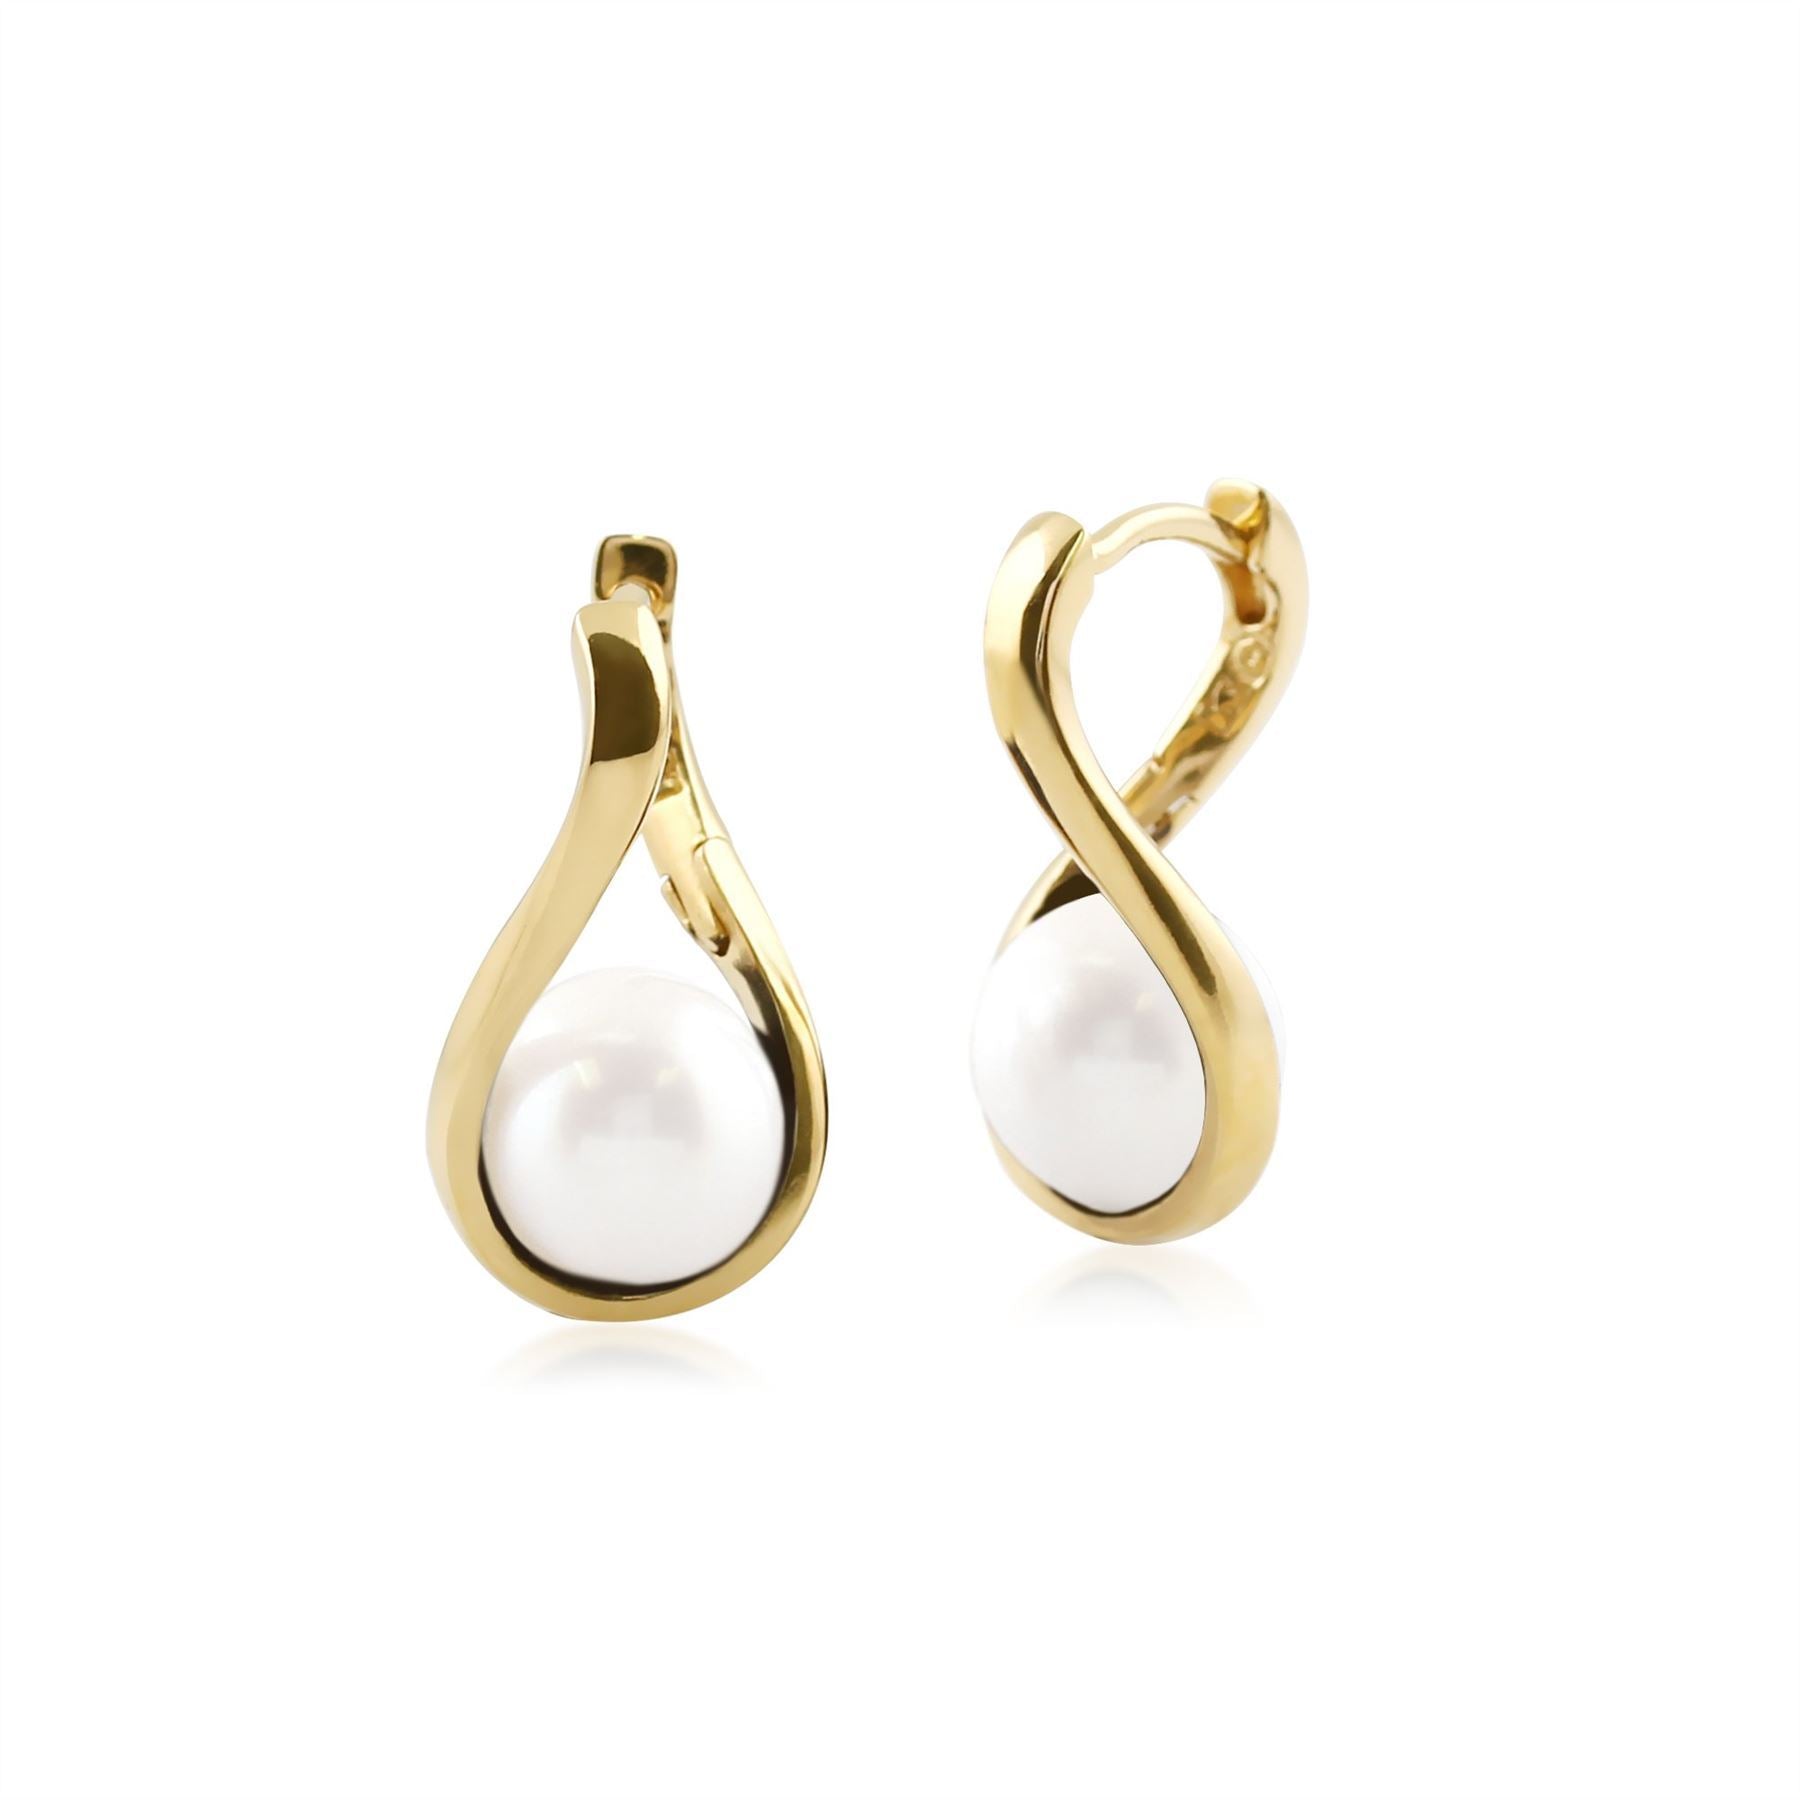 Kosmos White Agate Orb Earrings in Yellow Gold Plated Sterling Silver